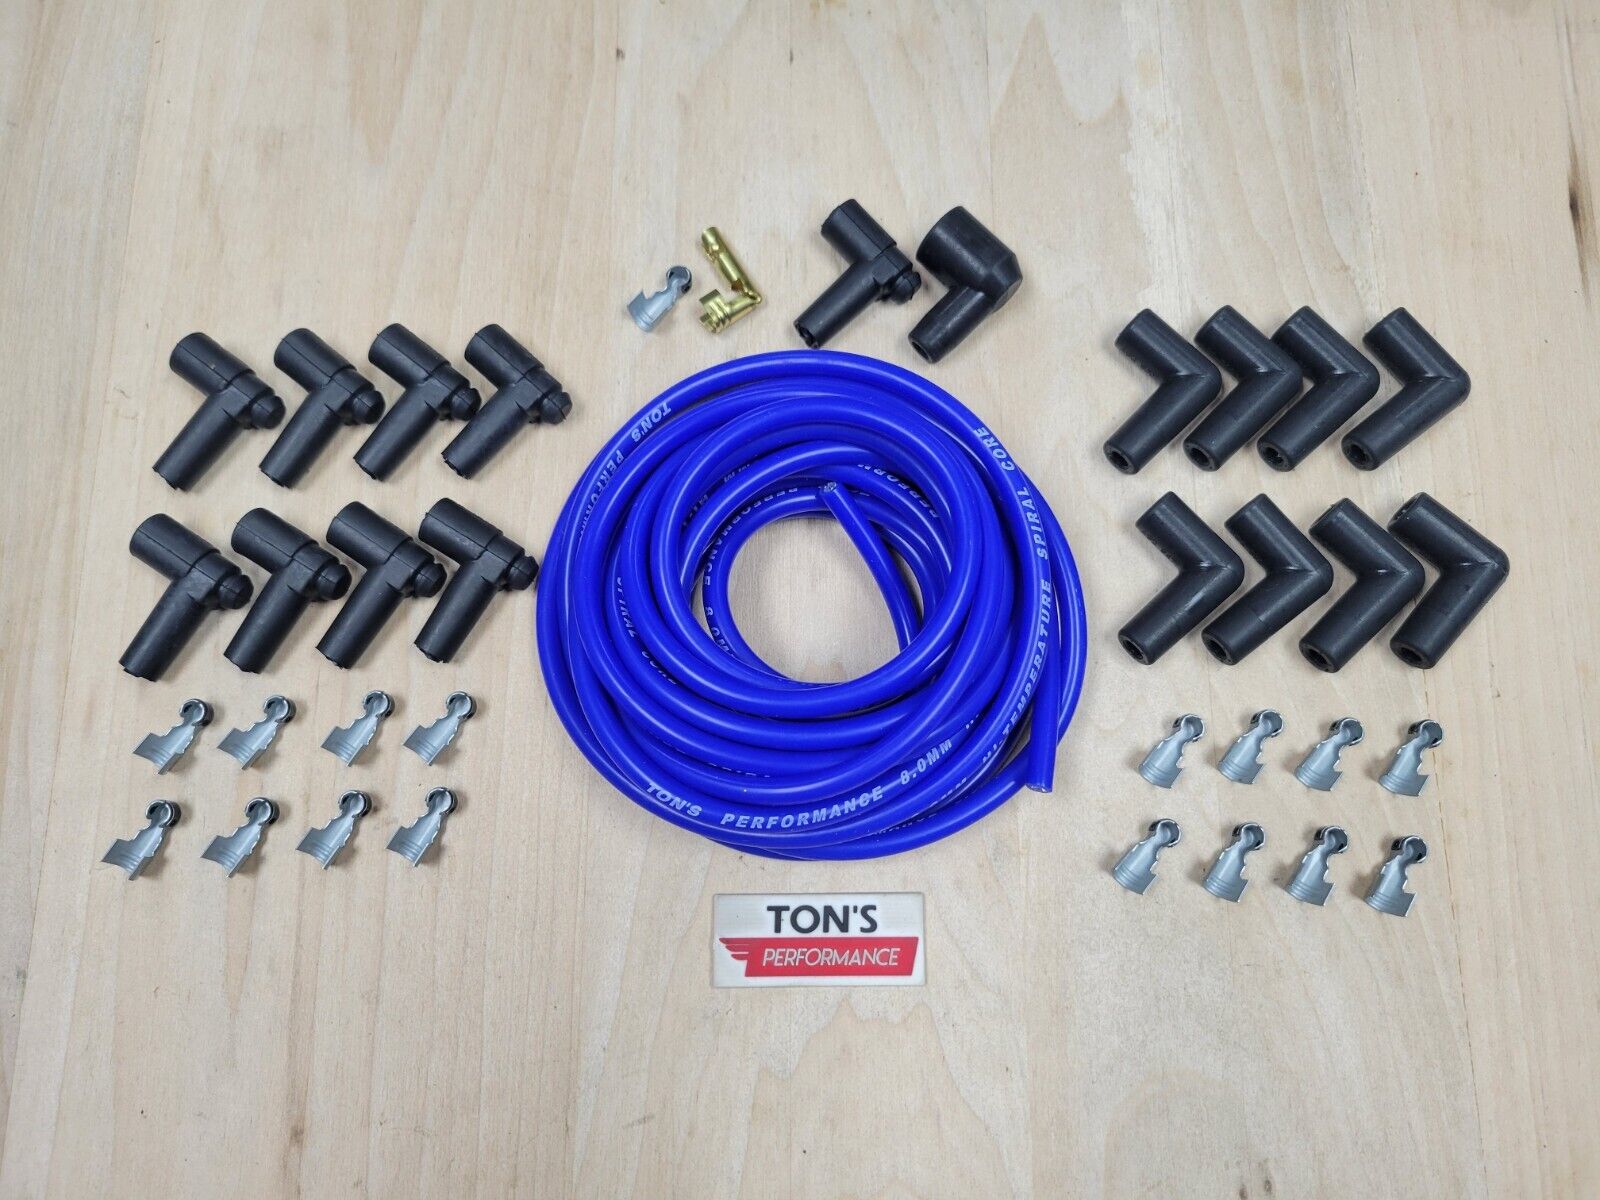 Ton\'s 8mm Universal Silicone 8mm Spark Plug Wire Kit Set DIY Wires v8 Blue HEI